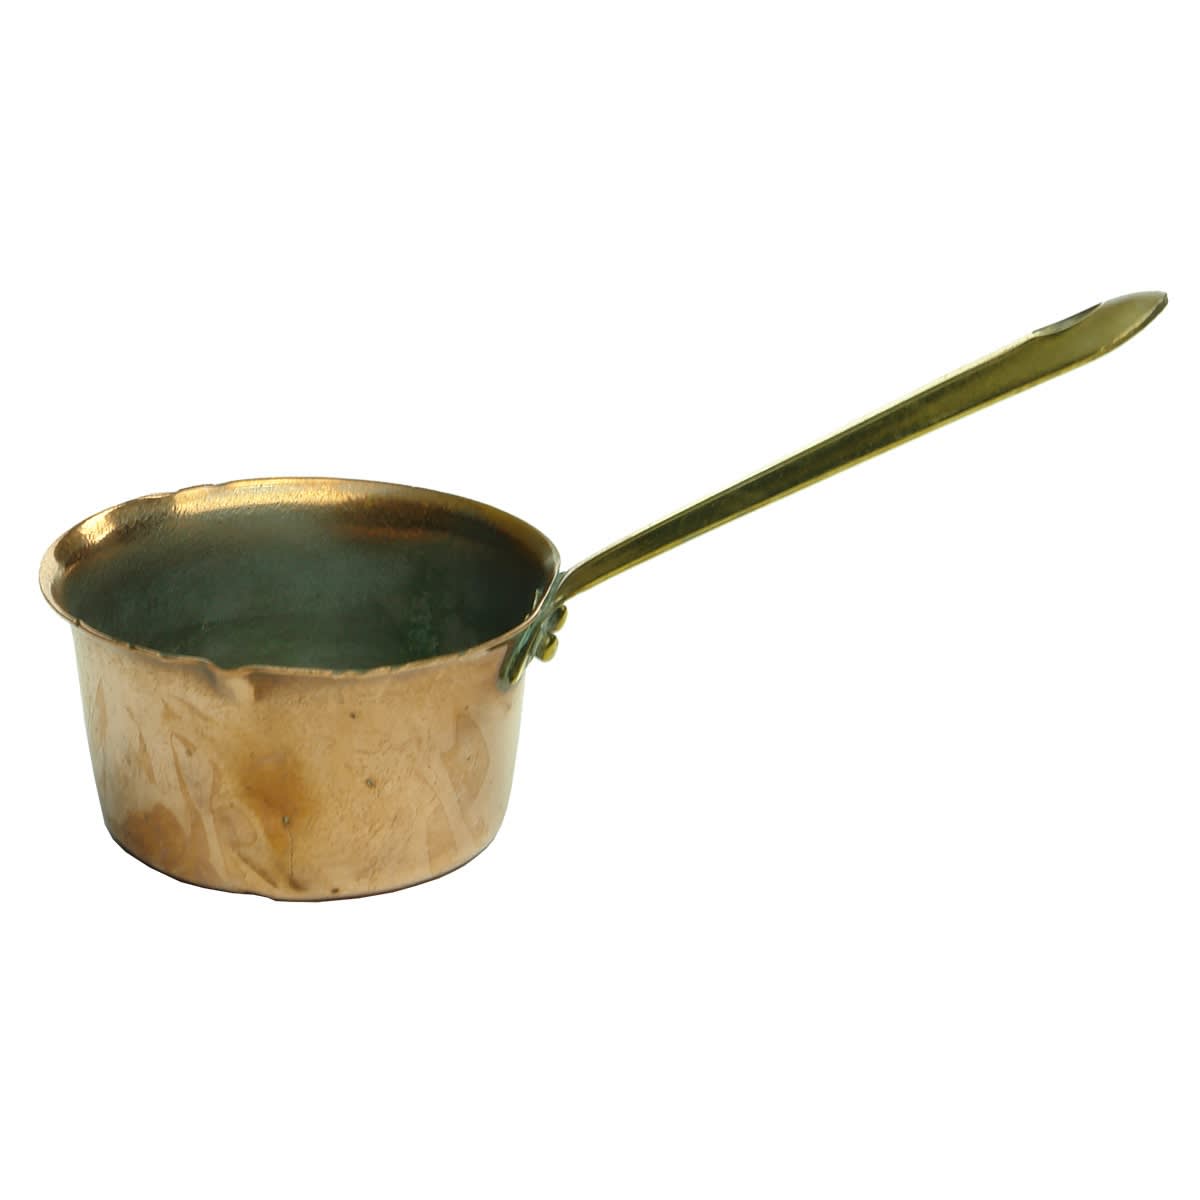 Small brass handled copper pan. 2 oz engraved on bottom.